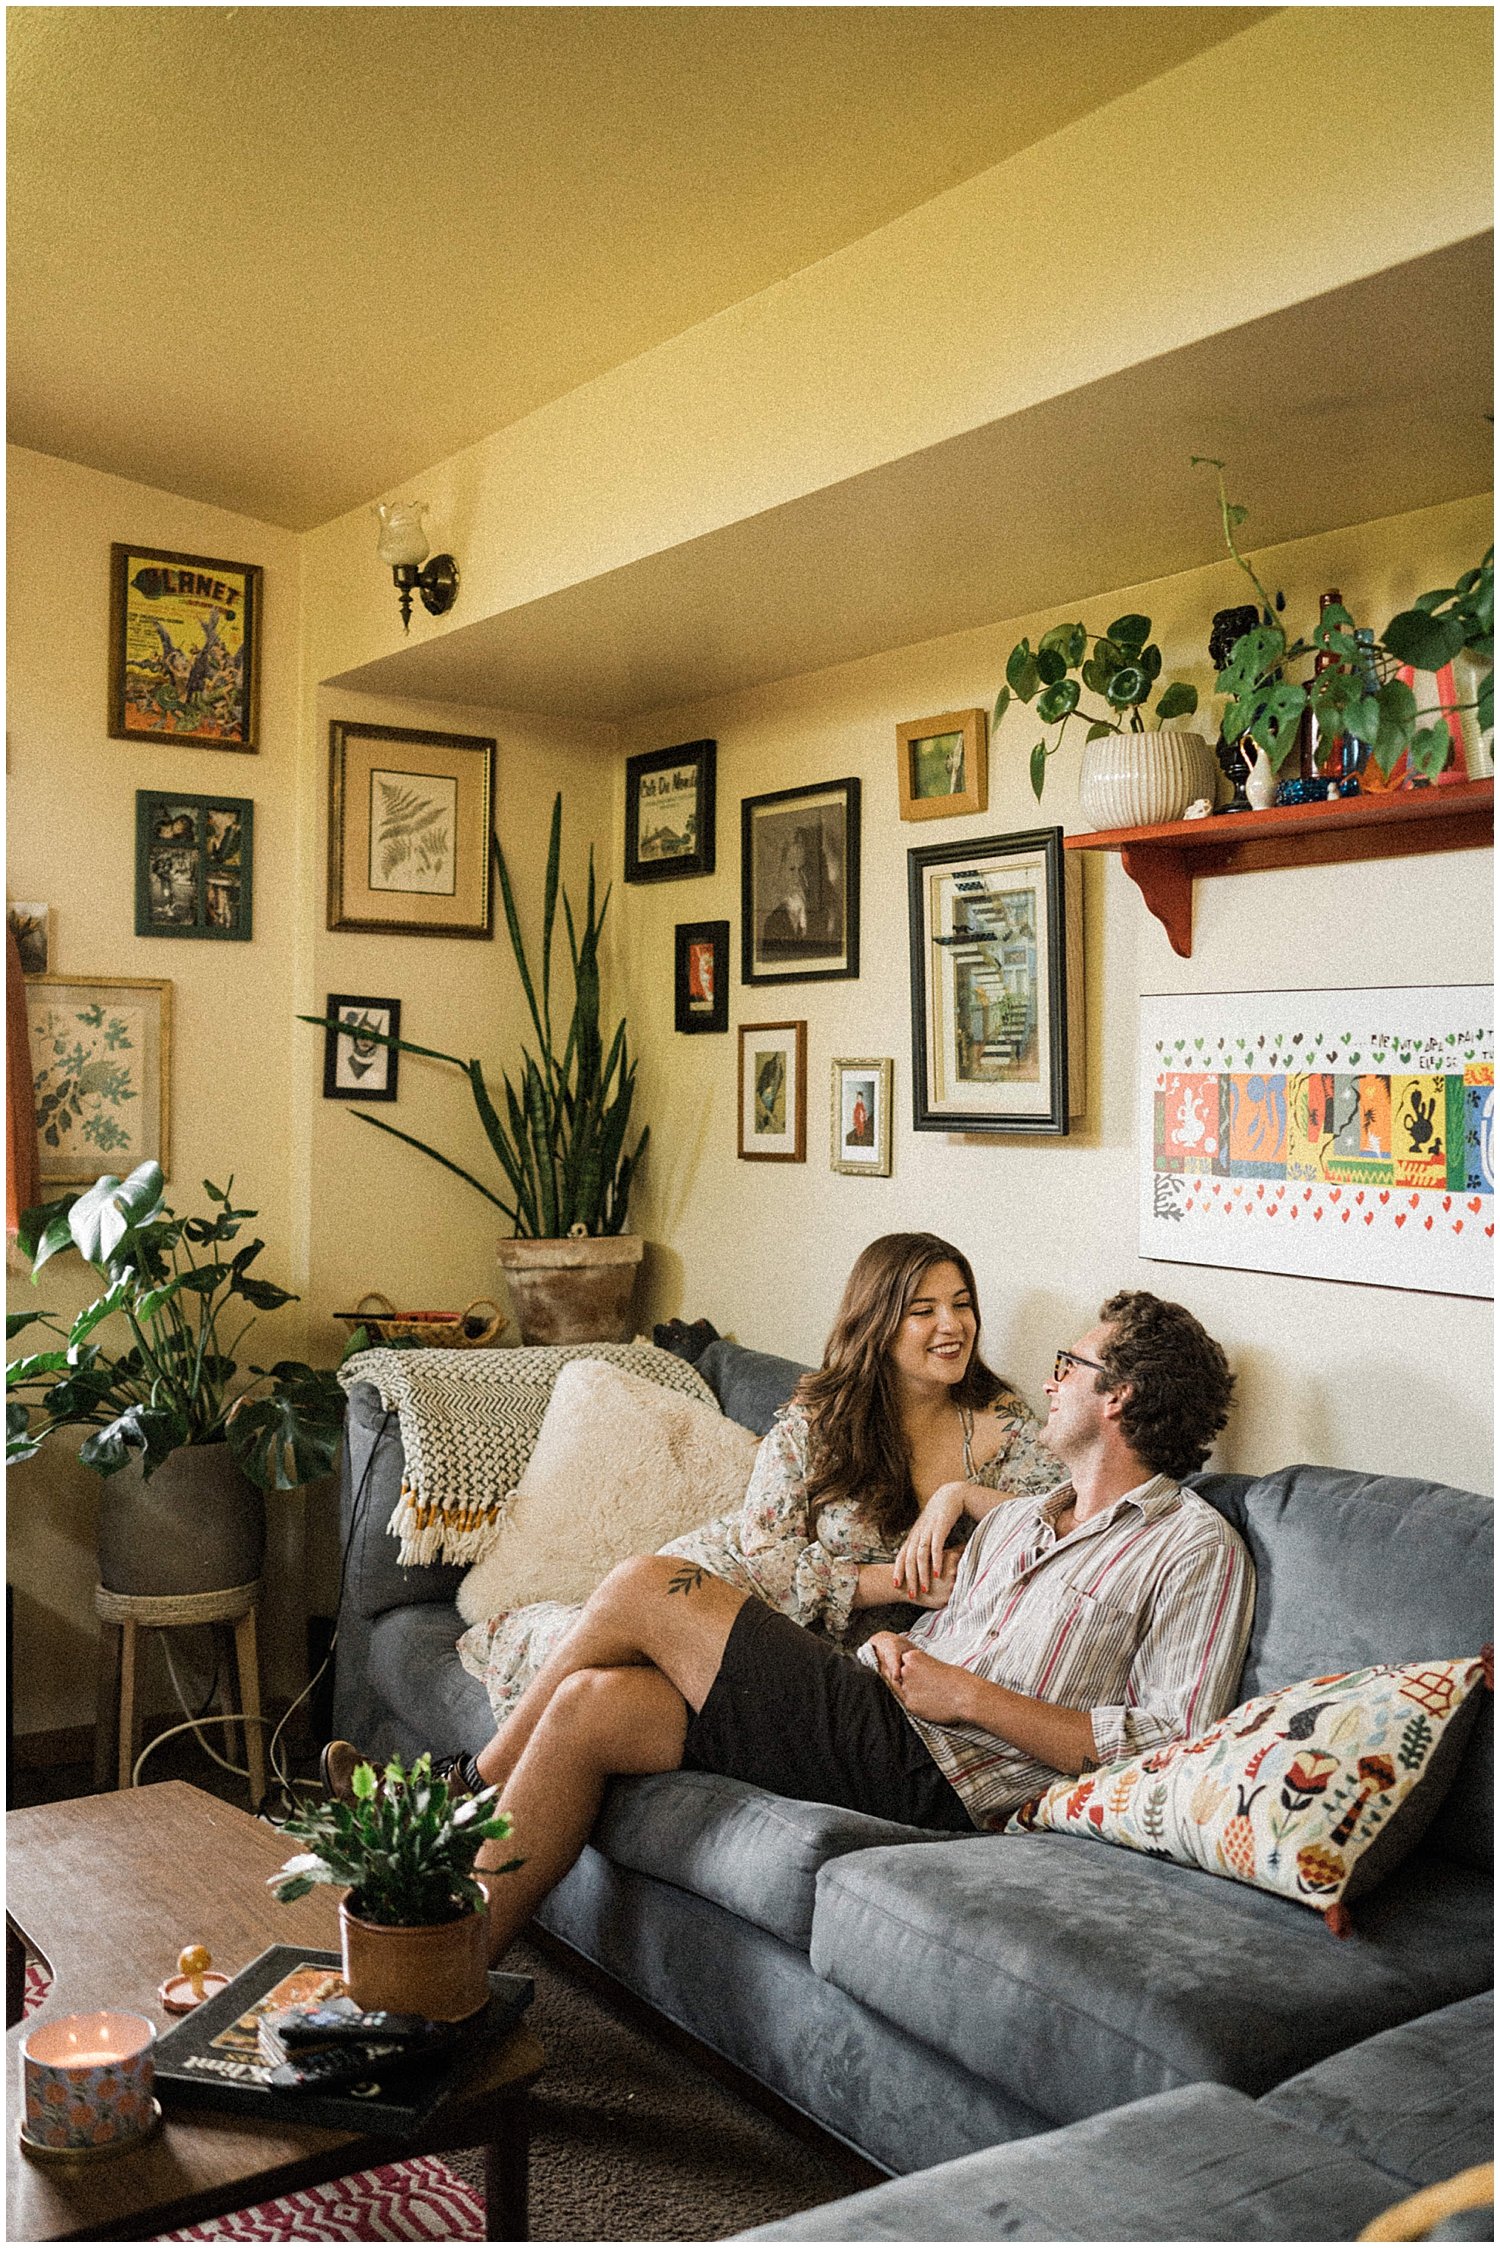 In-Home Engagement Portraits | Yellow Springs, Ohio